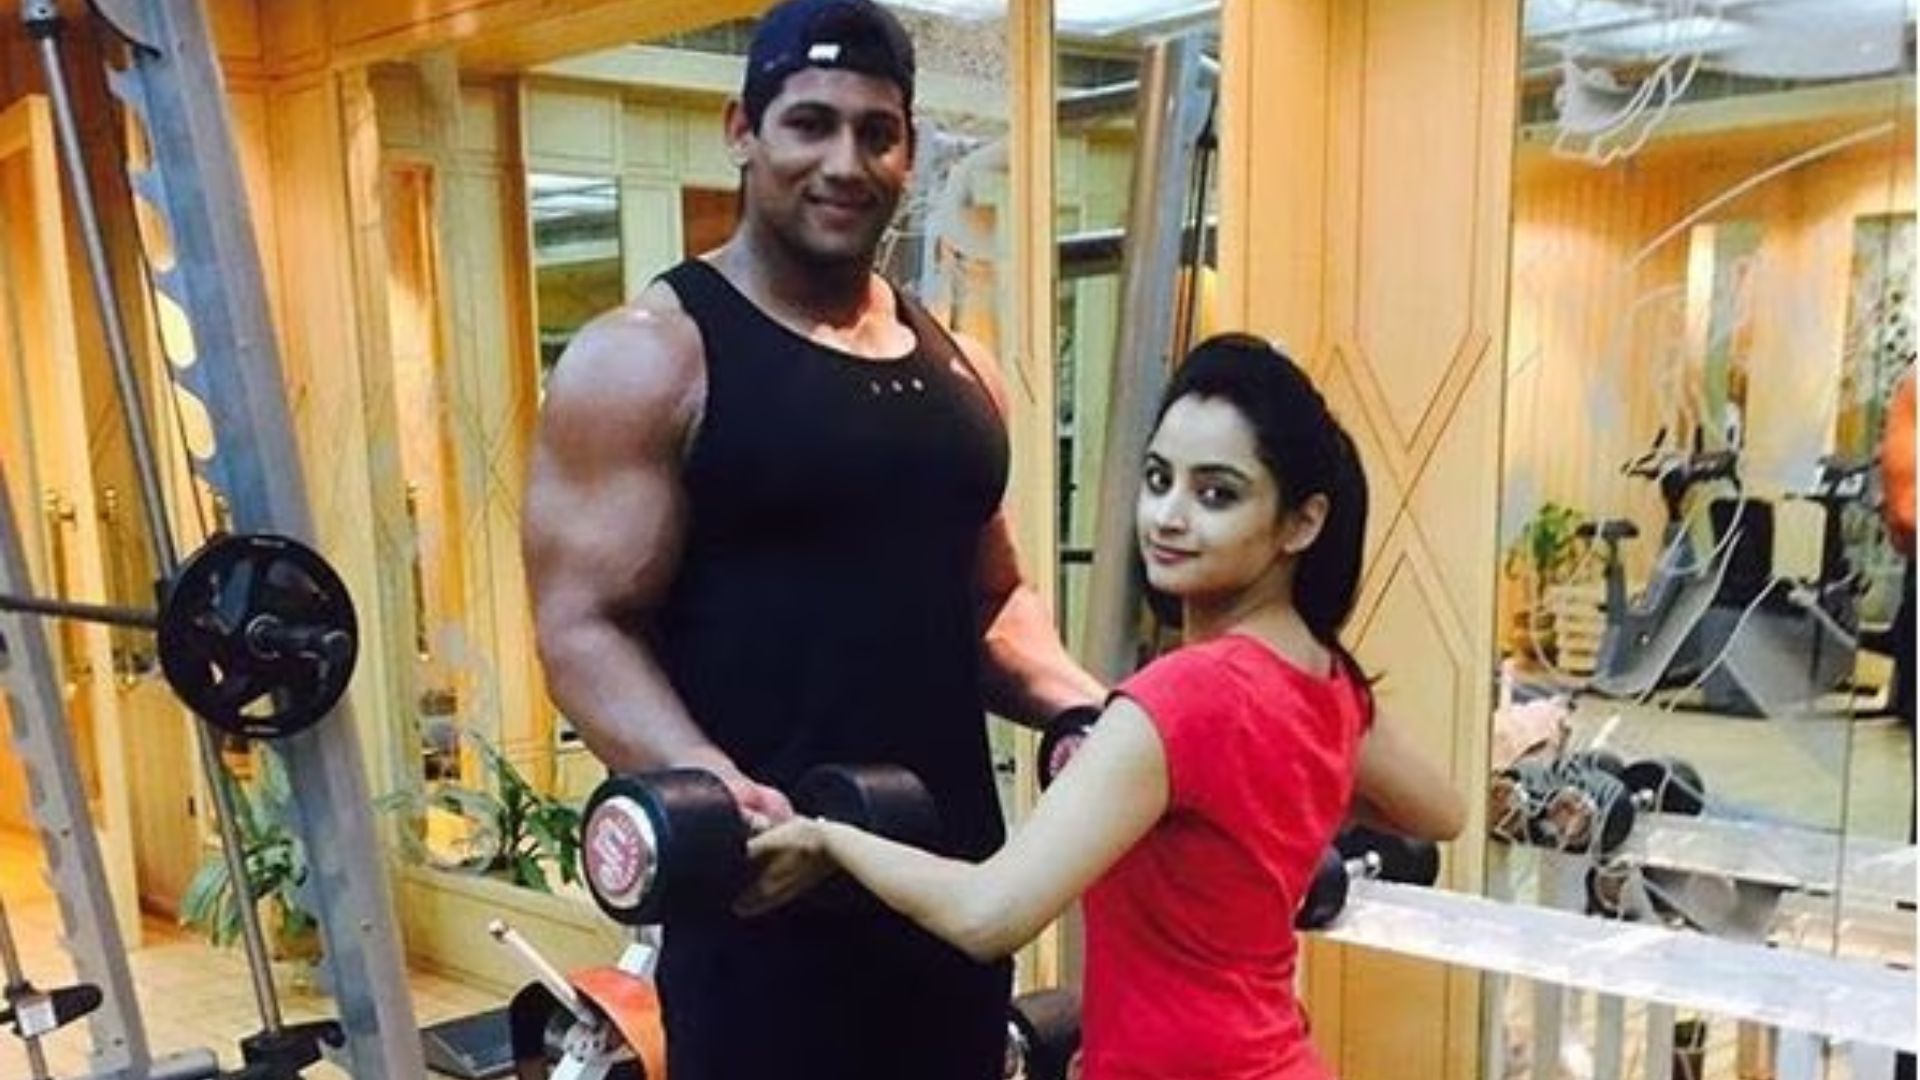 Danish Akhtar Saifi With A Girl In The Gym